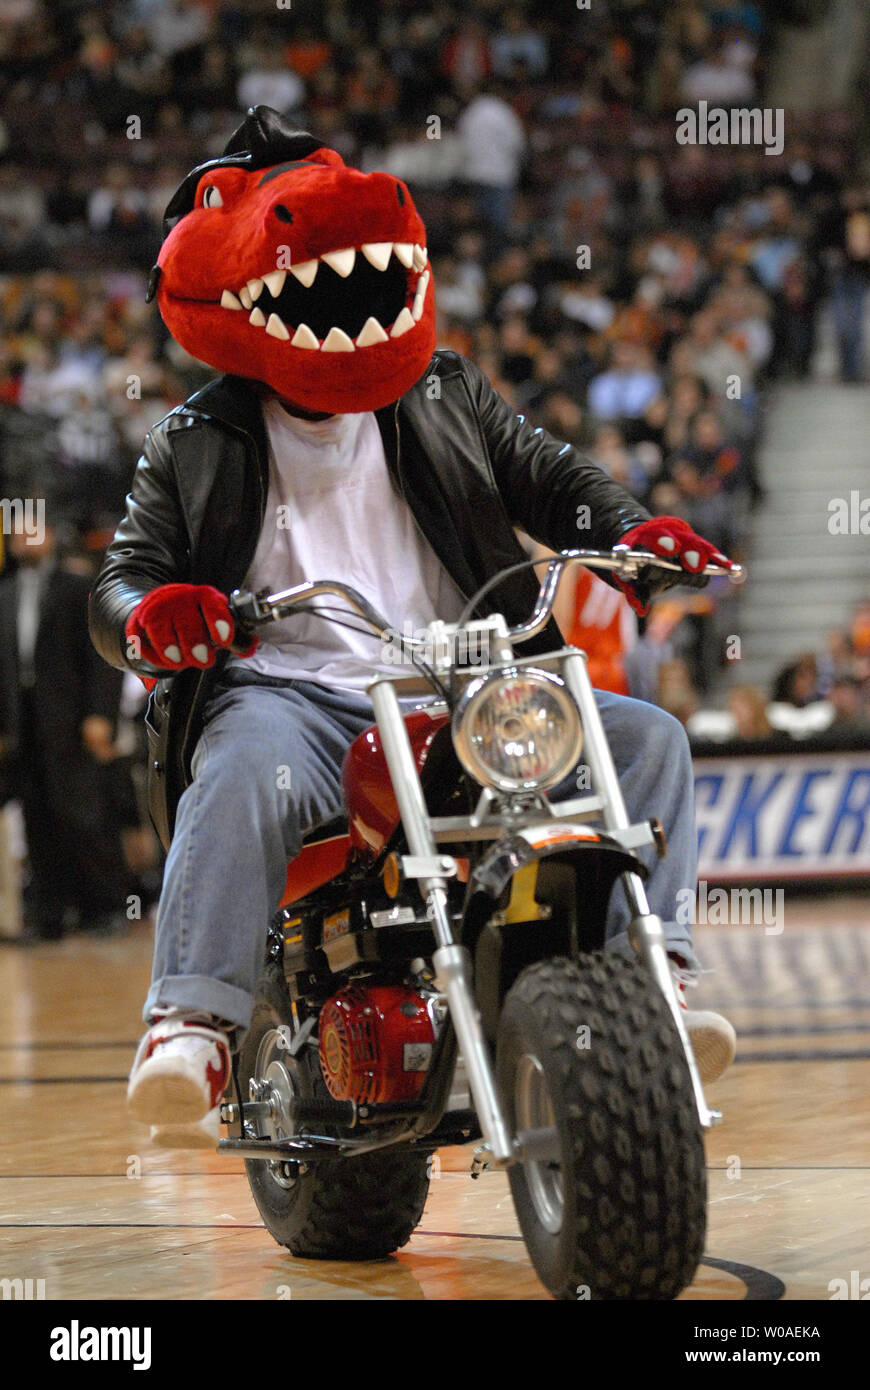 The Raptor mascot rides out onto the hardwood on a moped during a time-out in the second quarter as the Toronto Raptors host the Charlotte Bobcats at the Air Canada Center in Toronto, Canada on January 22, 2007.The Raptors went on to beat the Bobcats 105-84. (UPI Photo/Christine Chew) Stock Photo